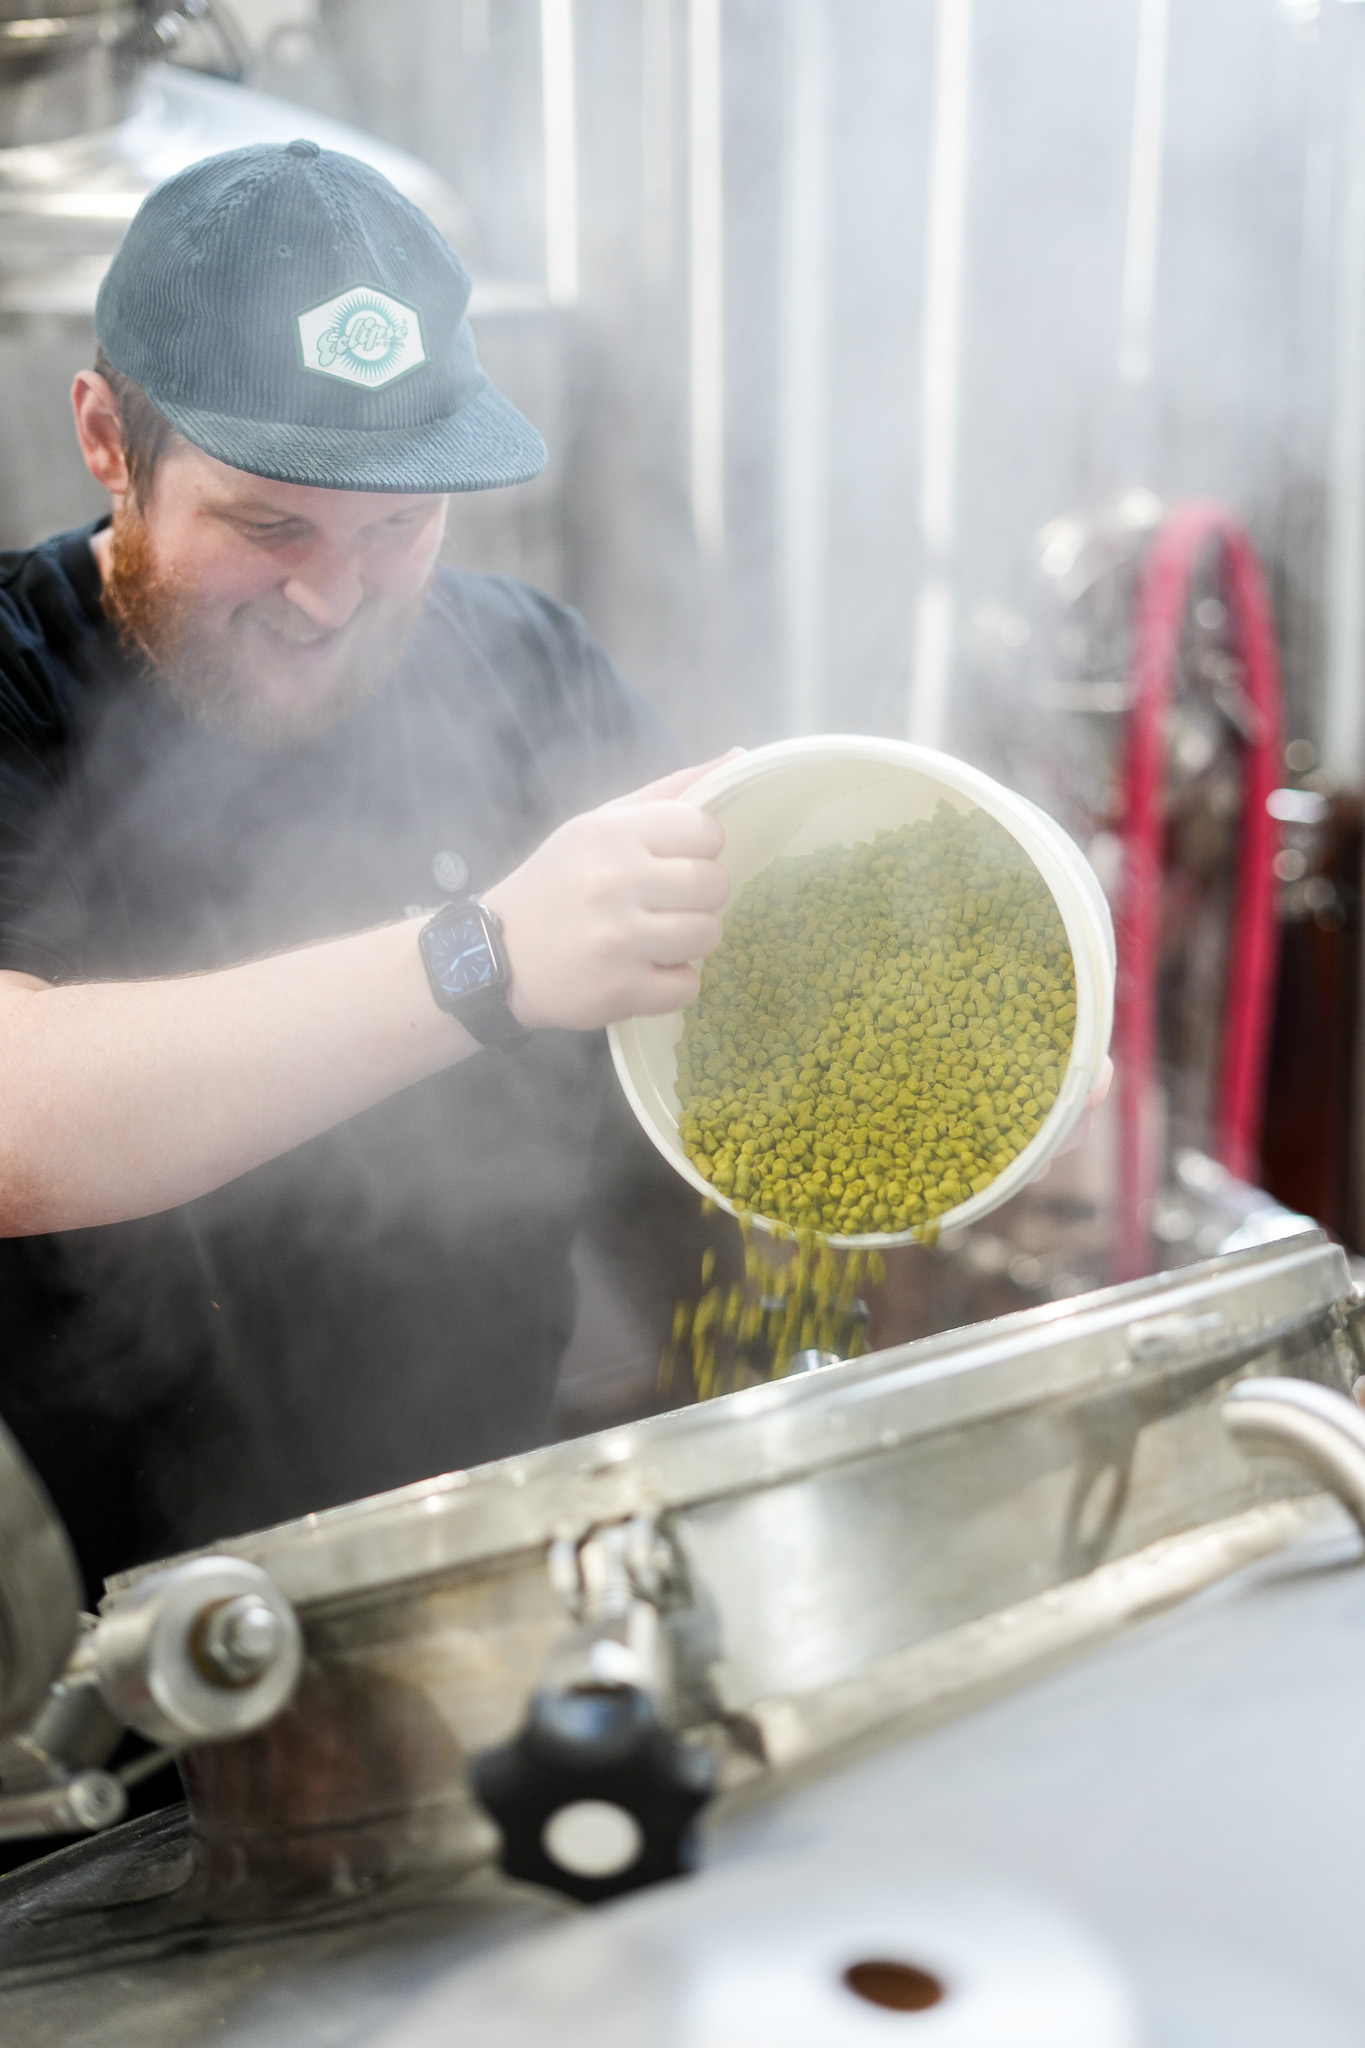 Tom BHX adding hops to the whirlpool